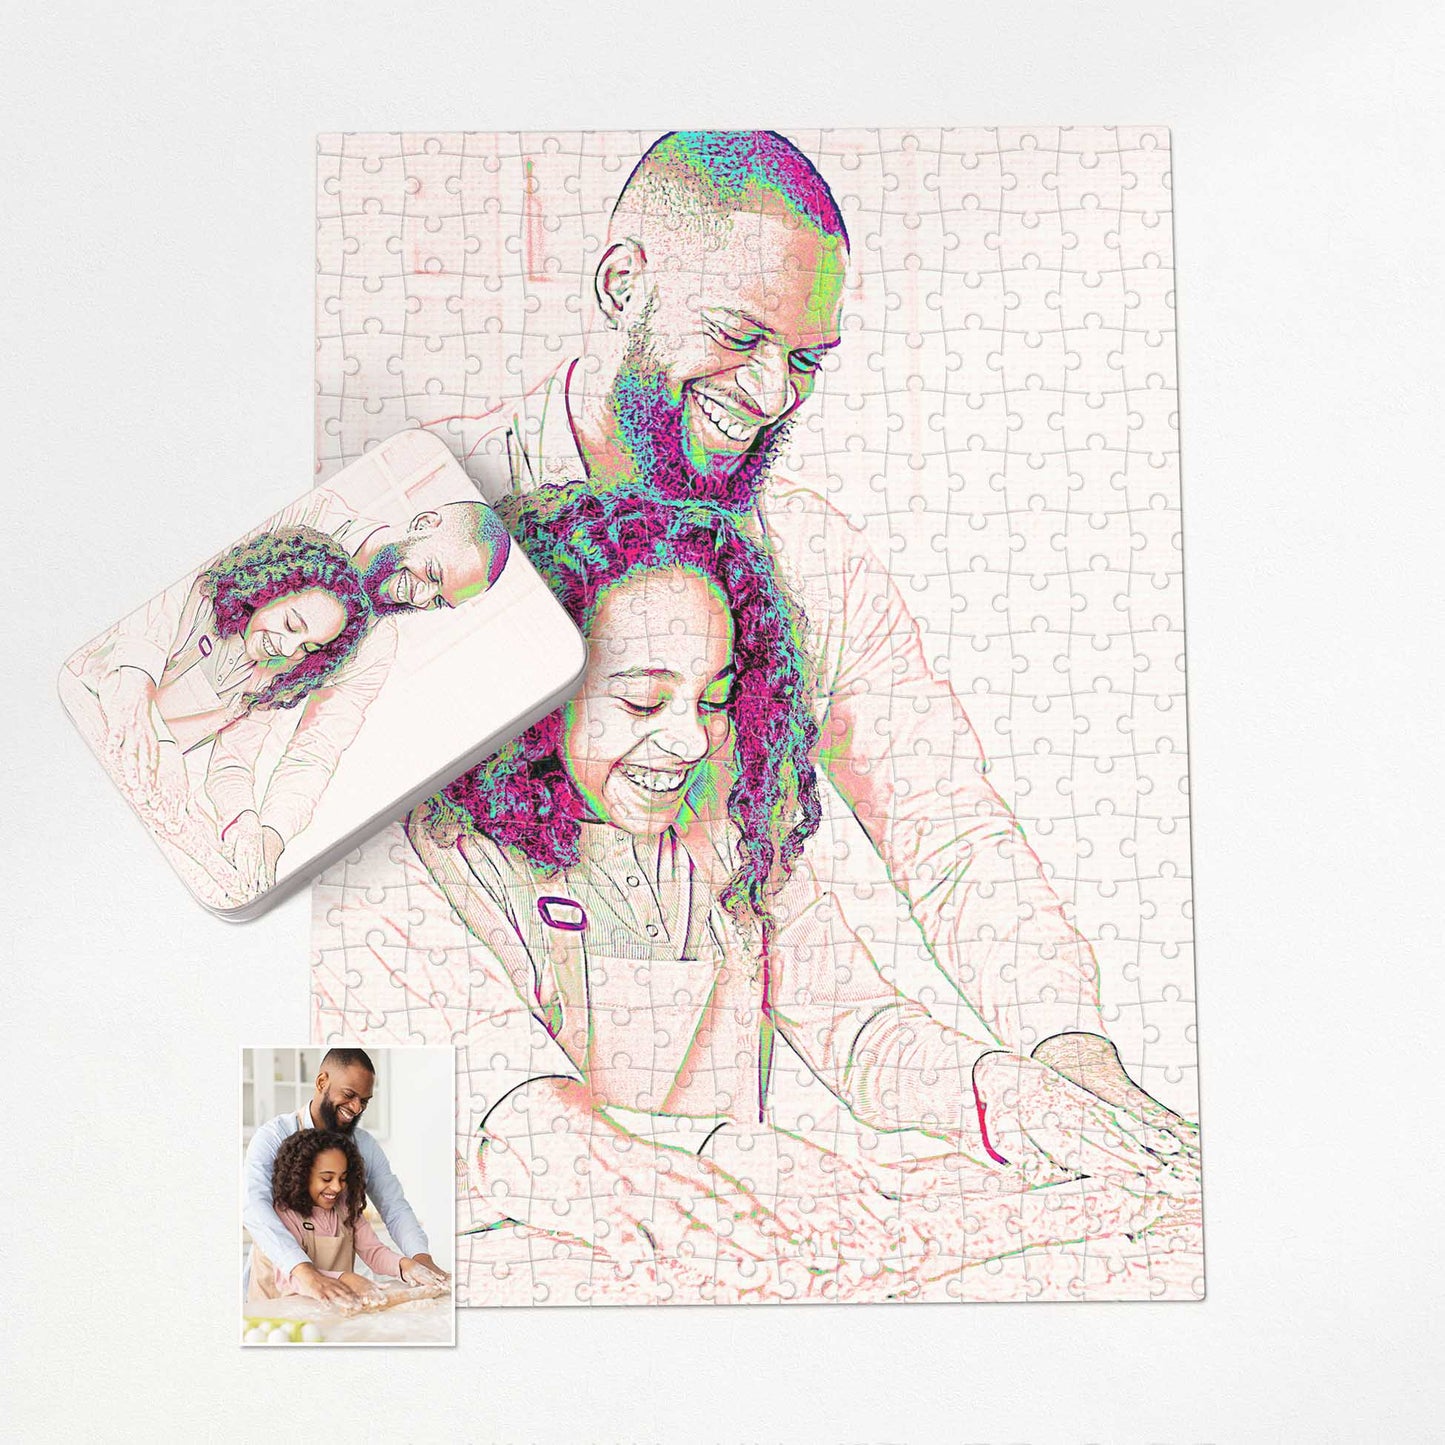 Elevate your gifting game with a Personalised Pencil Drawing Jigsaw Puzzle. Combining classic charm with modern vibes, it's the ultimate gift for family and friends who appreciate the traditional yet cool and vibrant